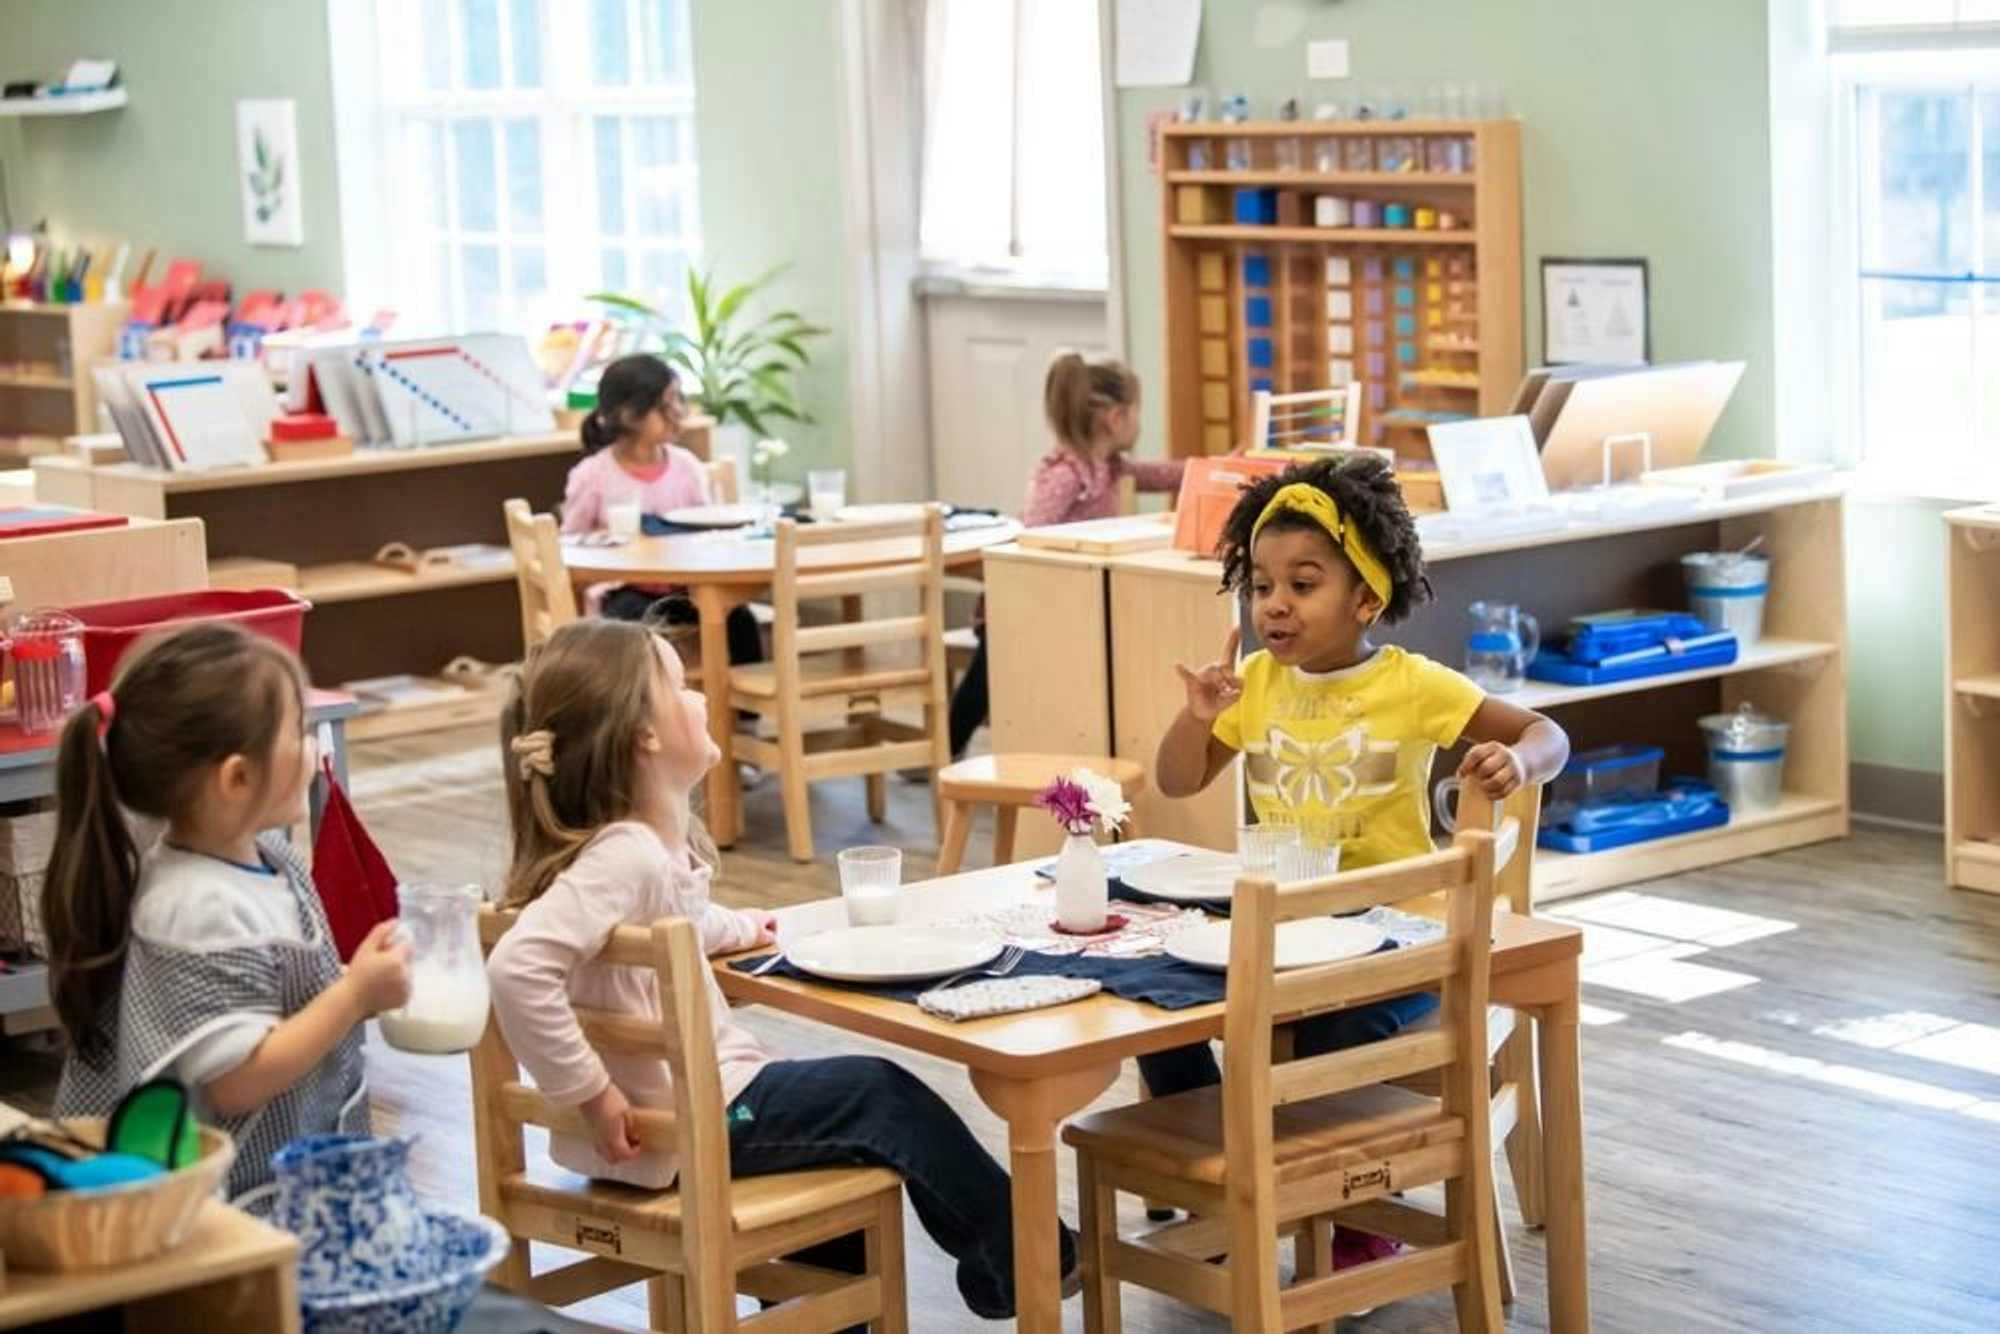 Three kindergarten-aged school girls enjoy a conversation over glasses of milk, while two other students complete activities behind them in the well-organized Montessori classroom. 